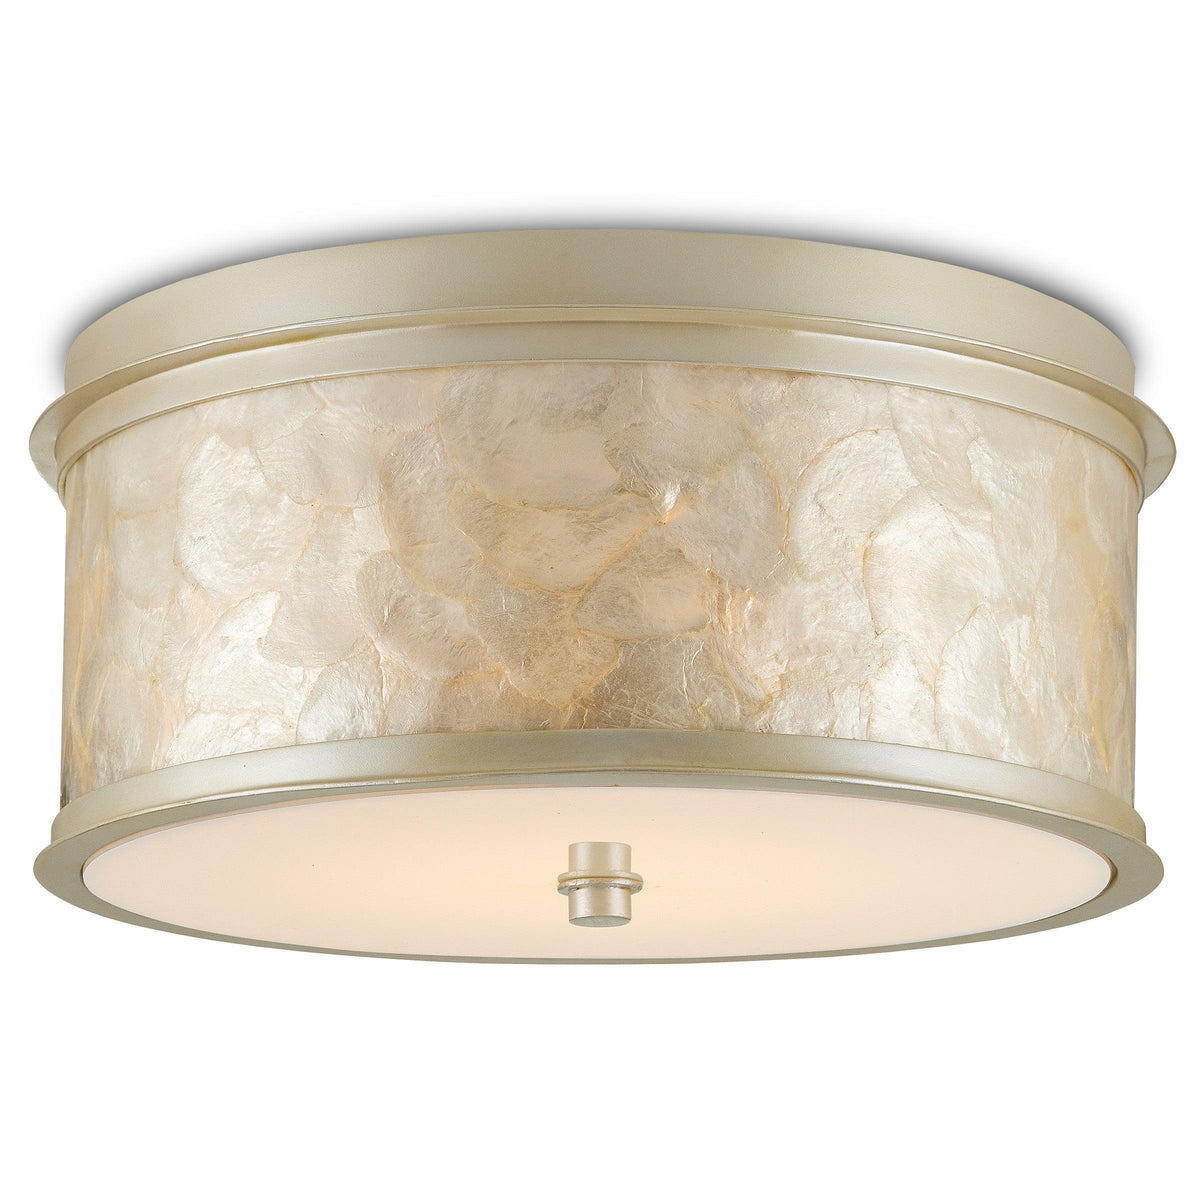 Currey and Company - Neith Flush Mount - 9999-0064 | Montreal Lighting & Hardware